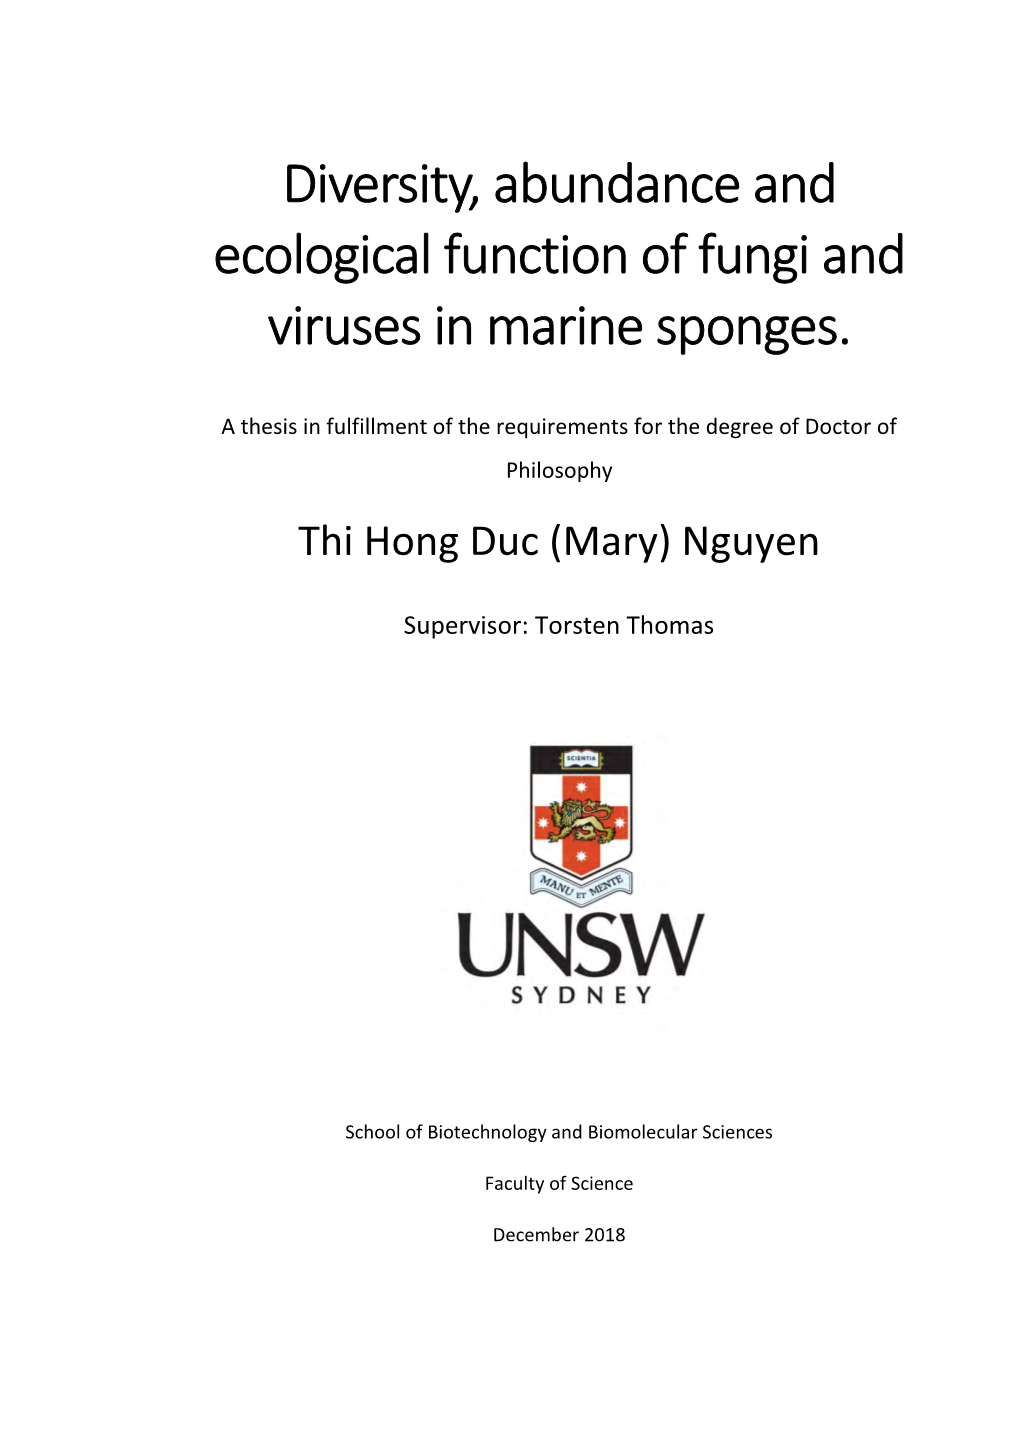 Diversity, Abundance and Ecological Function of Fungi and Viruses in Marine Sponges